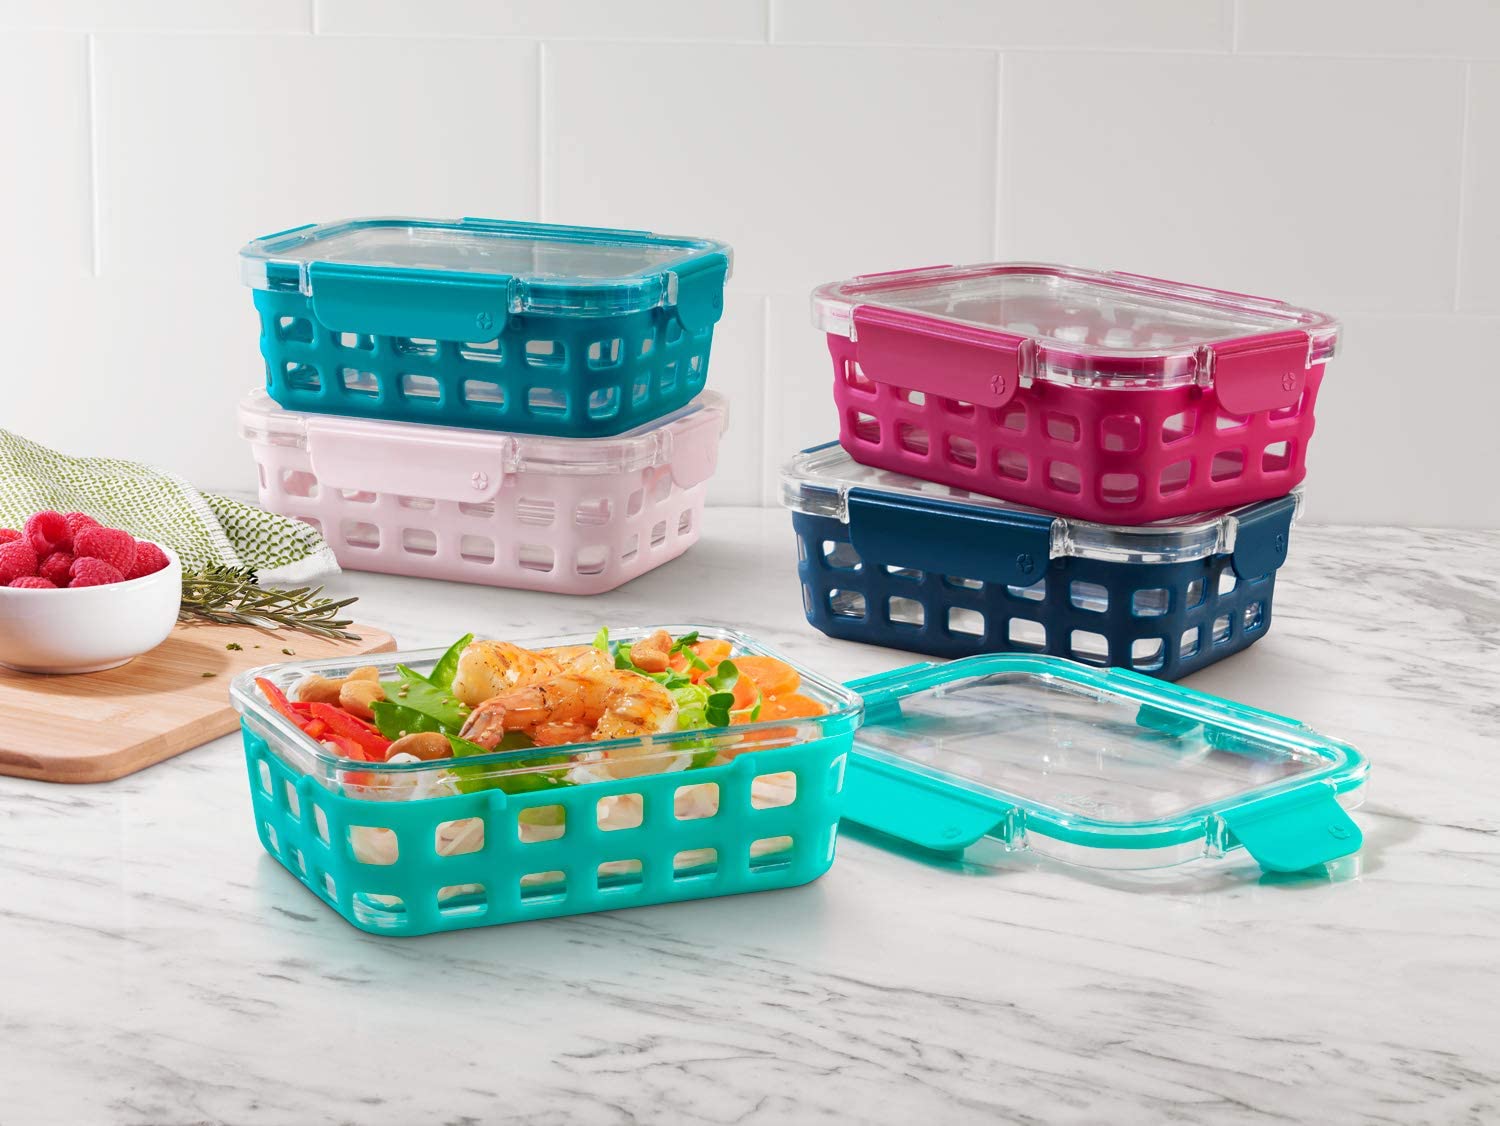 Ello Duraglass Meal Prep Container- Glass Food Storage Container with  Silicone Sleeve and Airtight BPA-Free Plastic Lid, Dishwasher, Microwave,  and